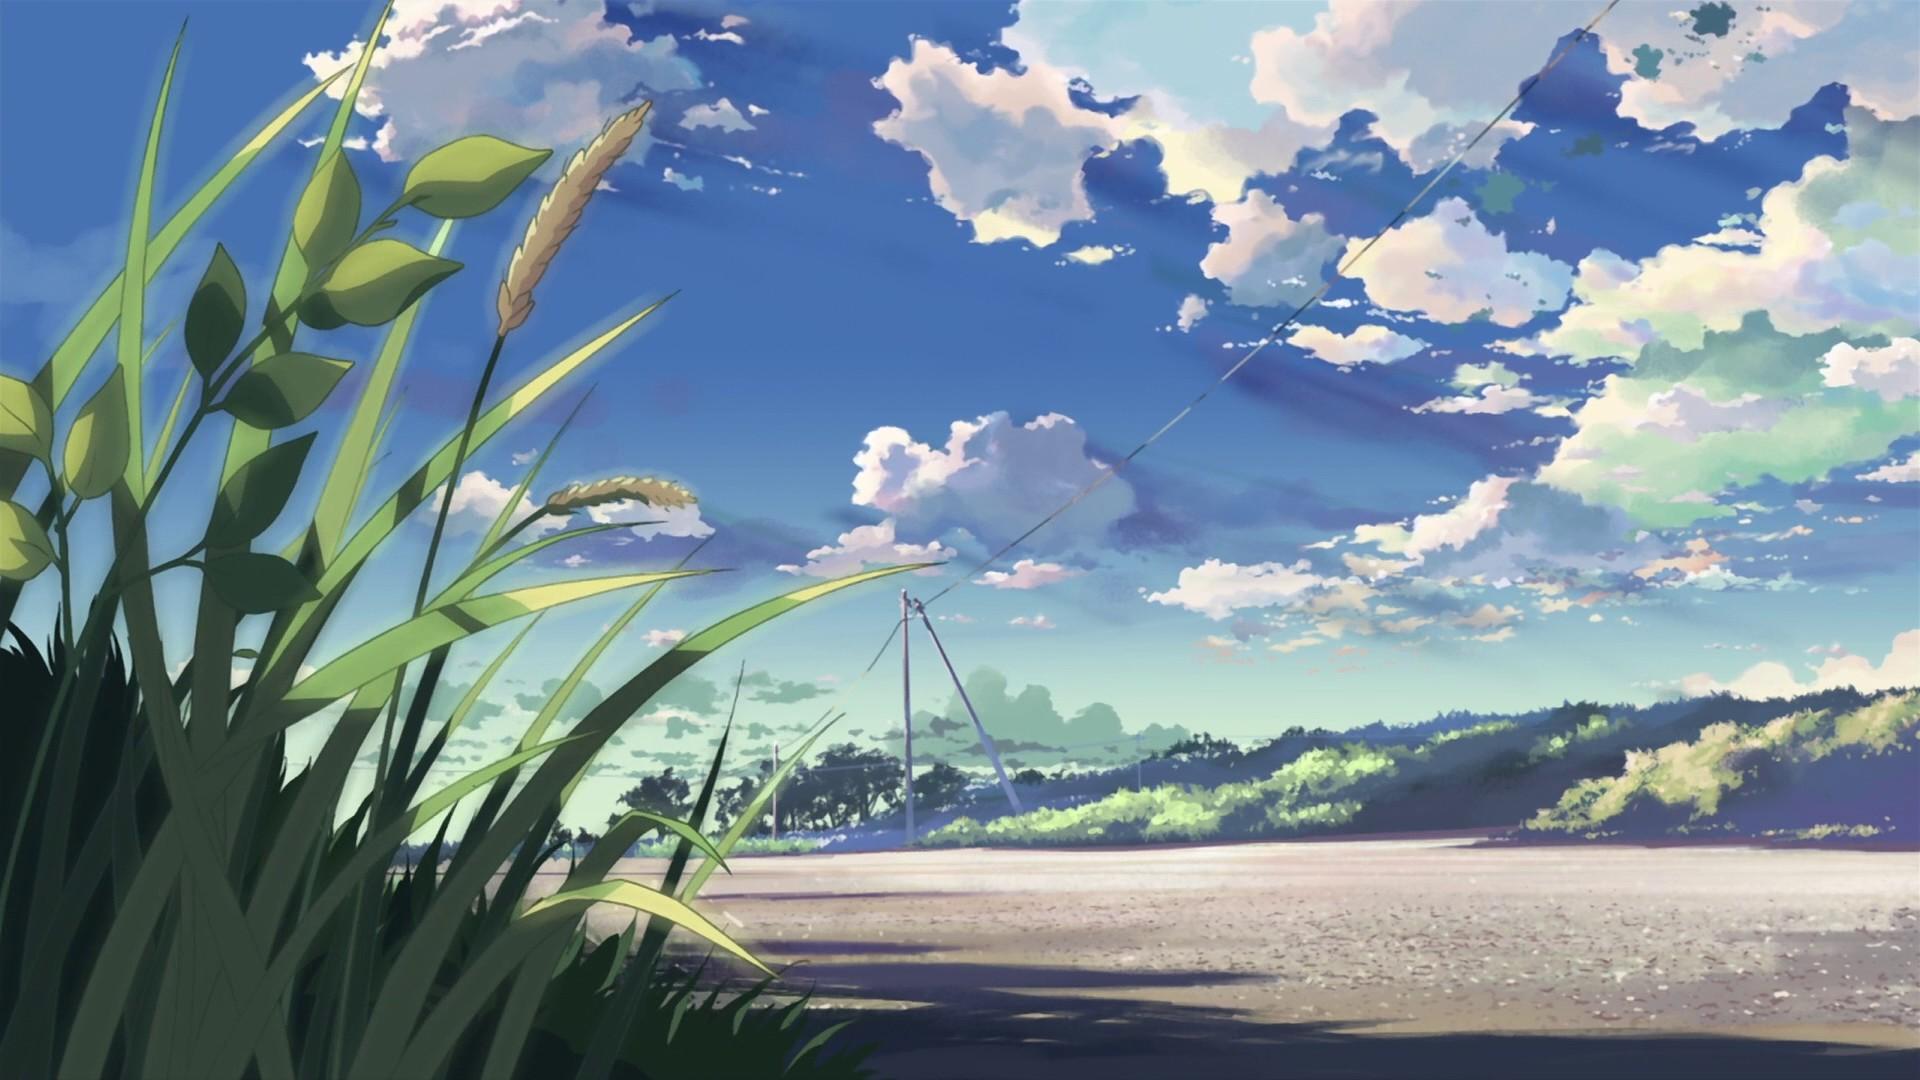 Download miễn phí 500 Nature background anime Full HD chất lượng cao